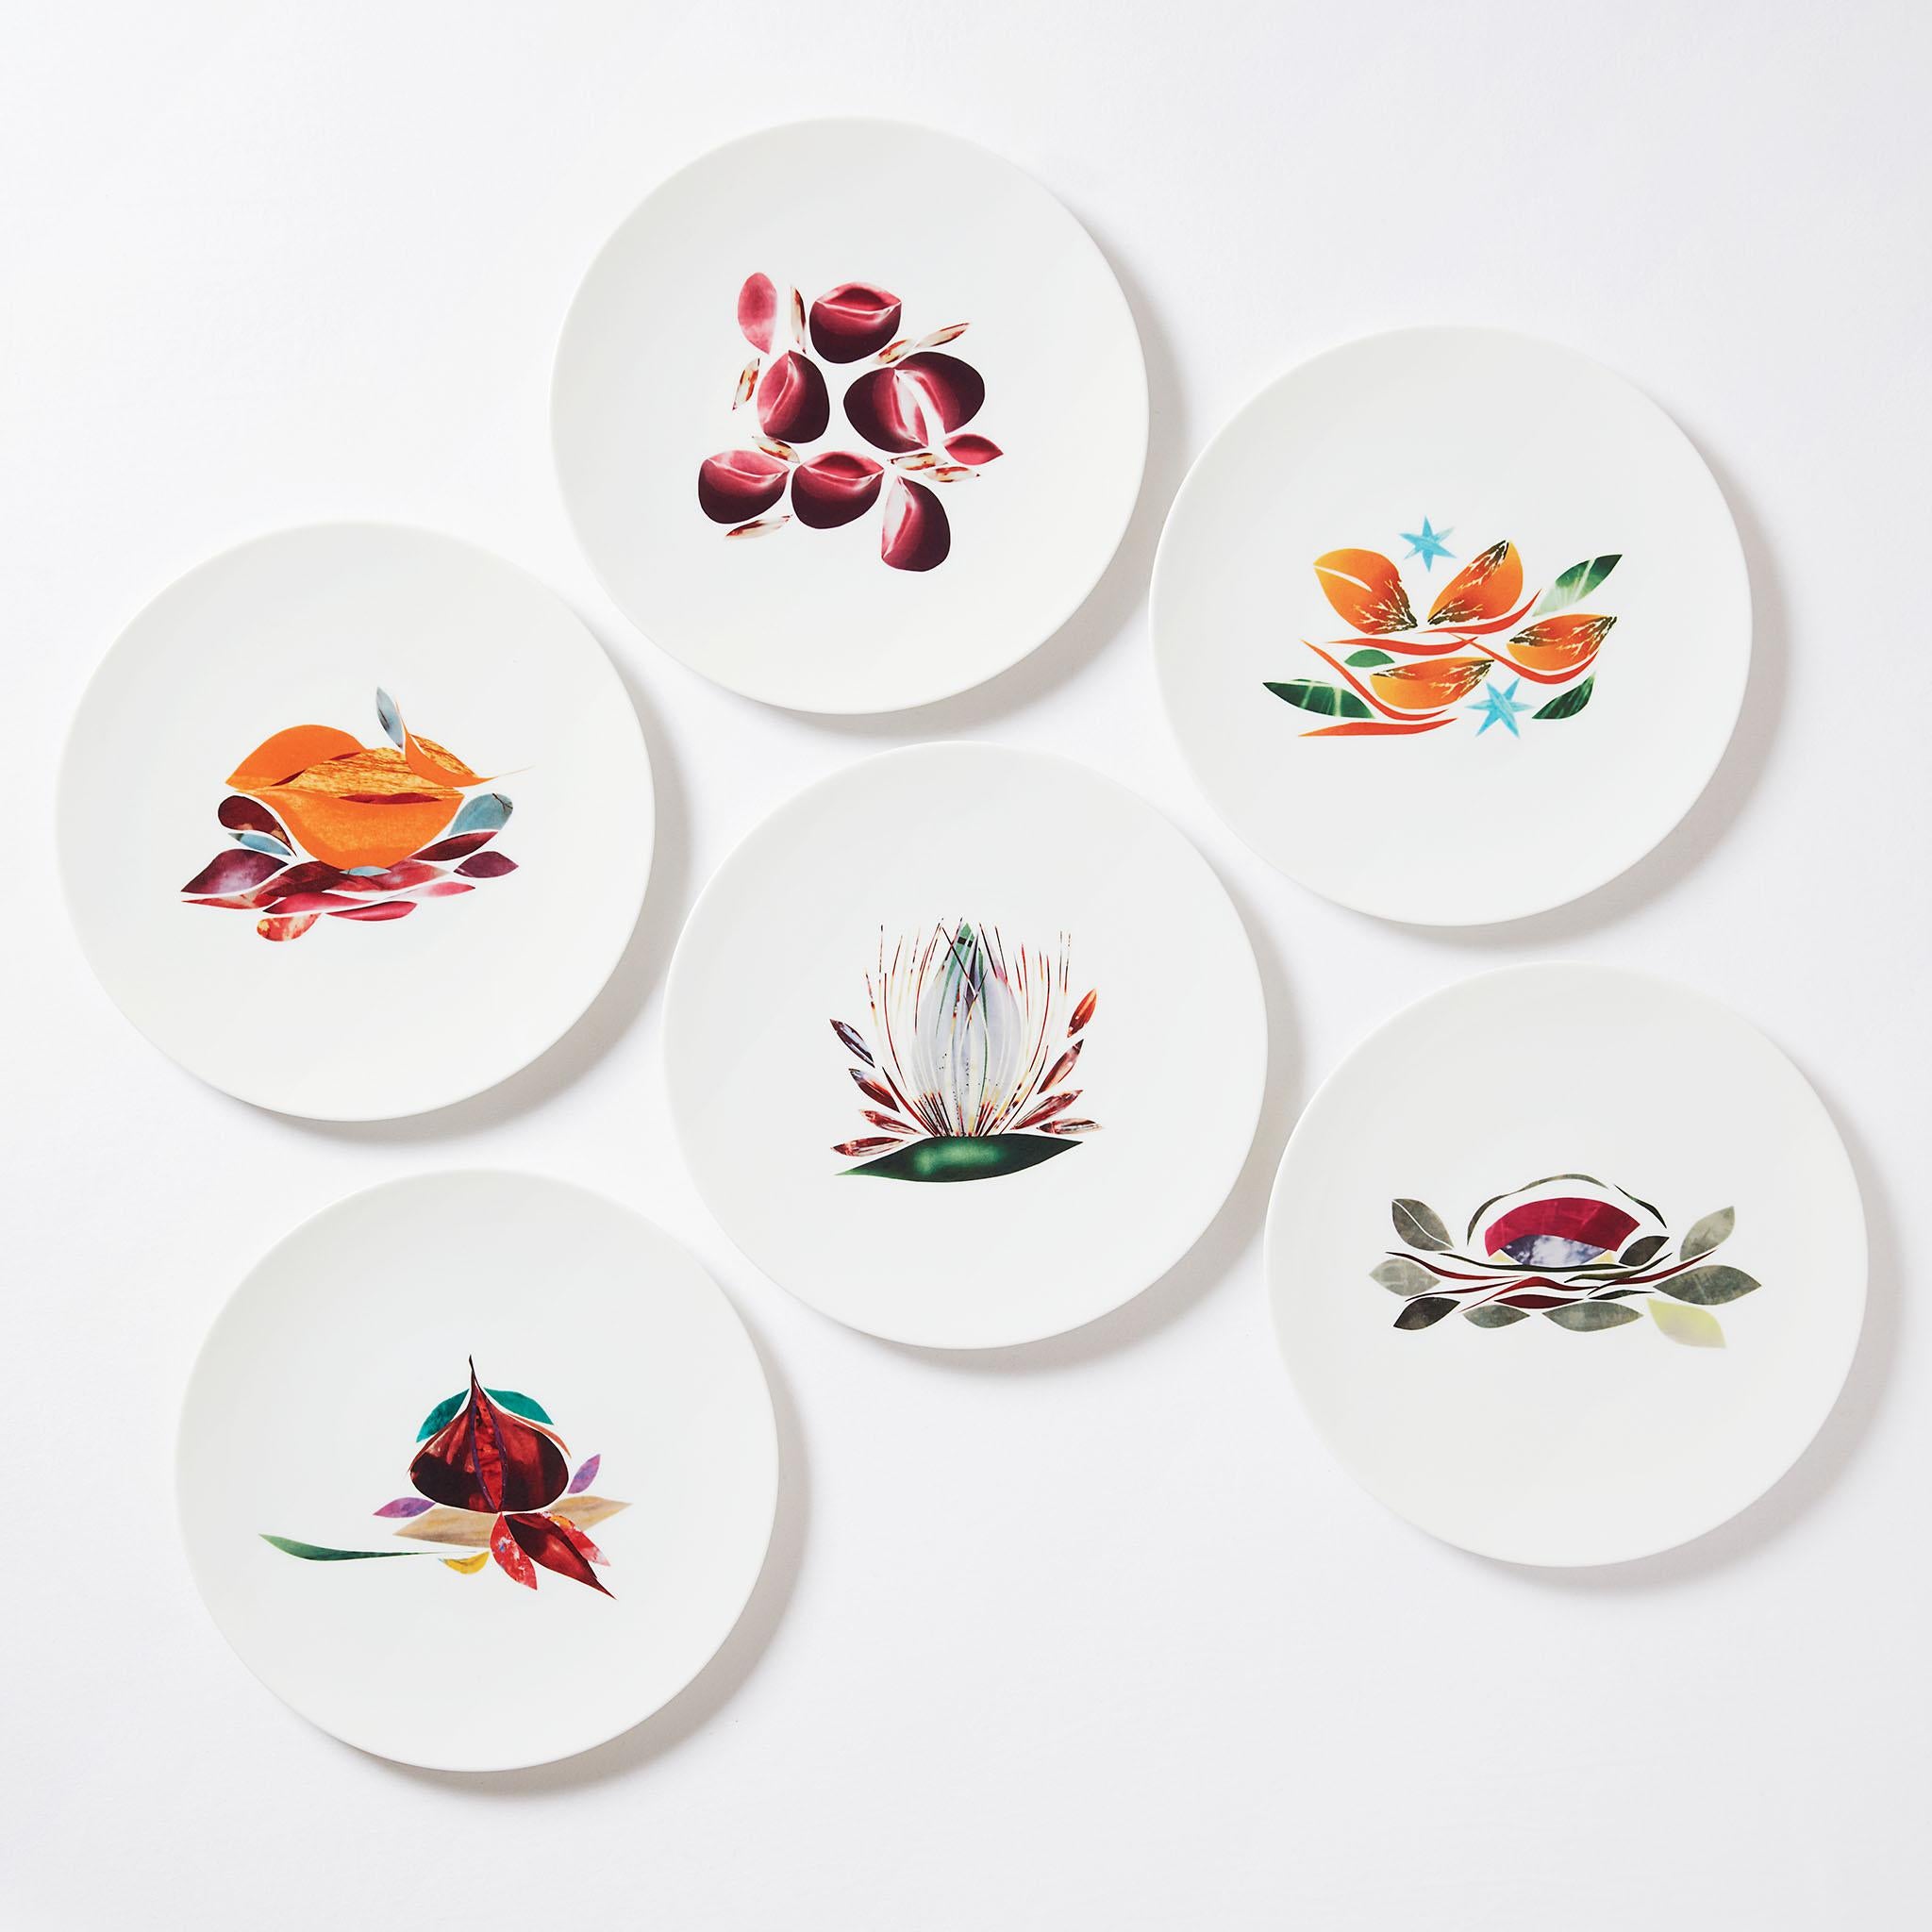 Hand-Crafted Dinner Porcelain Plate by the French Chef Alain Passard Model 